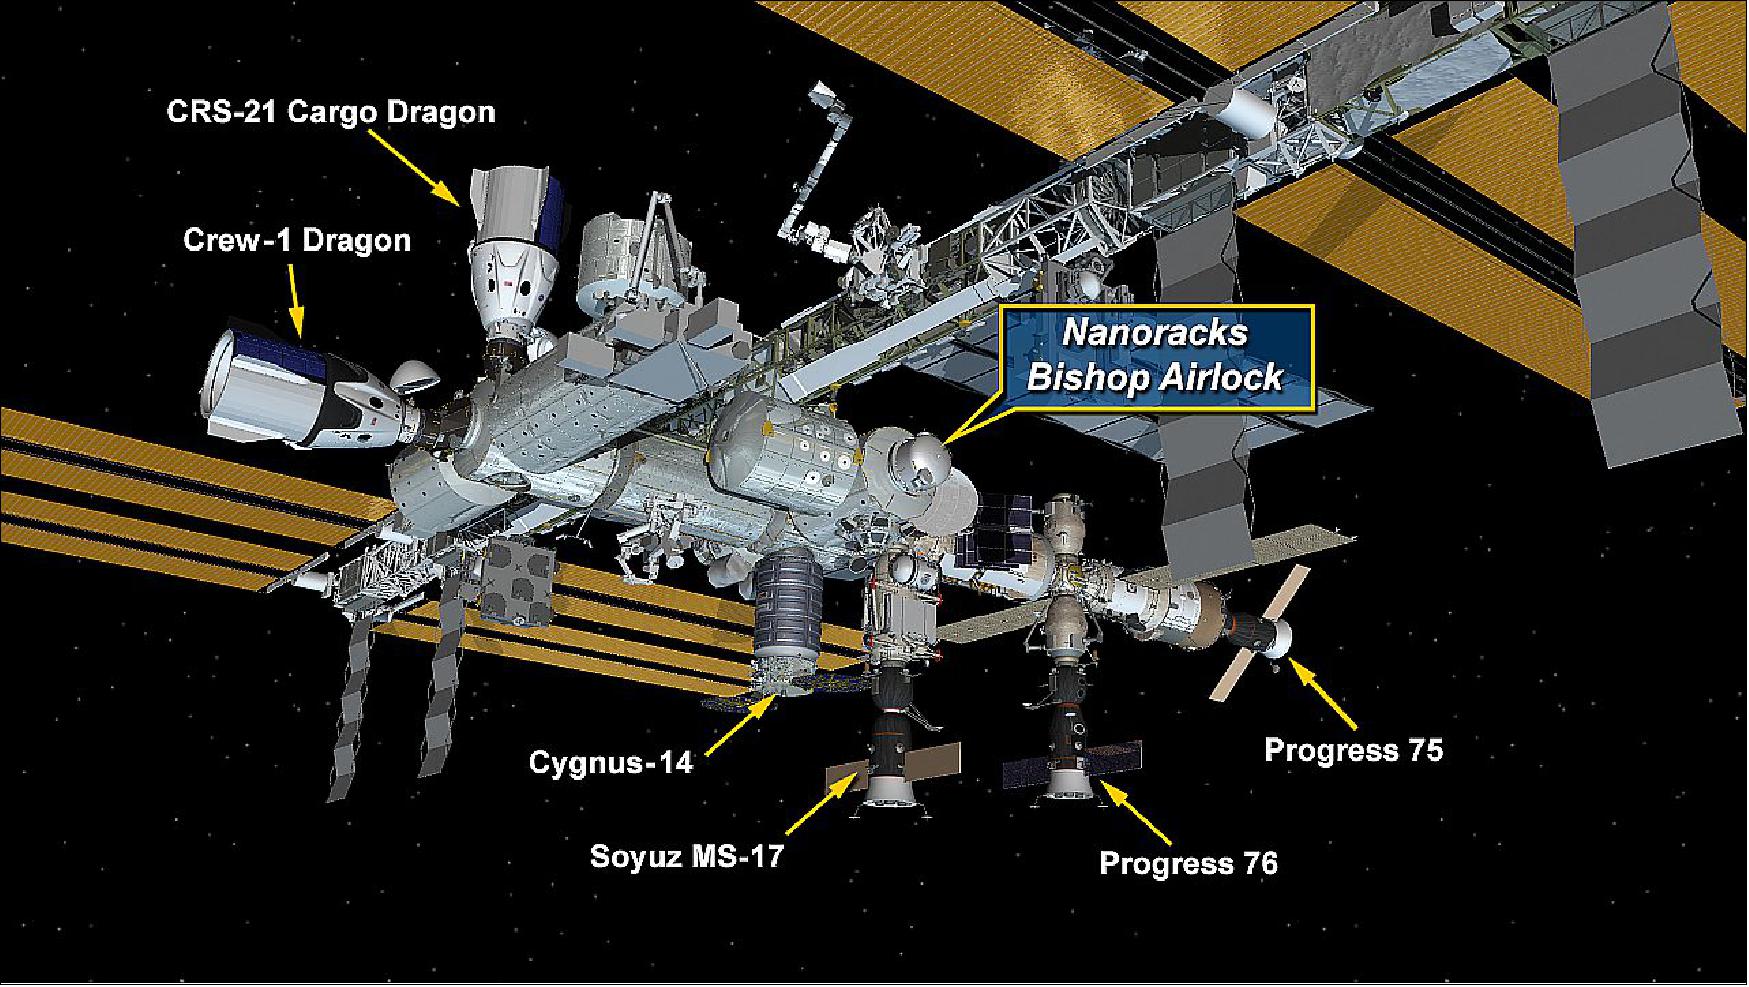 Figure 2: The new Nanoracks Bishop research airlock is installed on the port side of the Tranquility module and significantly expands the capacity for commercial space research on the outside of the orbiting lab (image credit: NASA, Nanoracks)